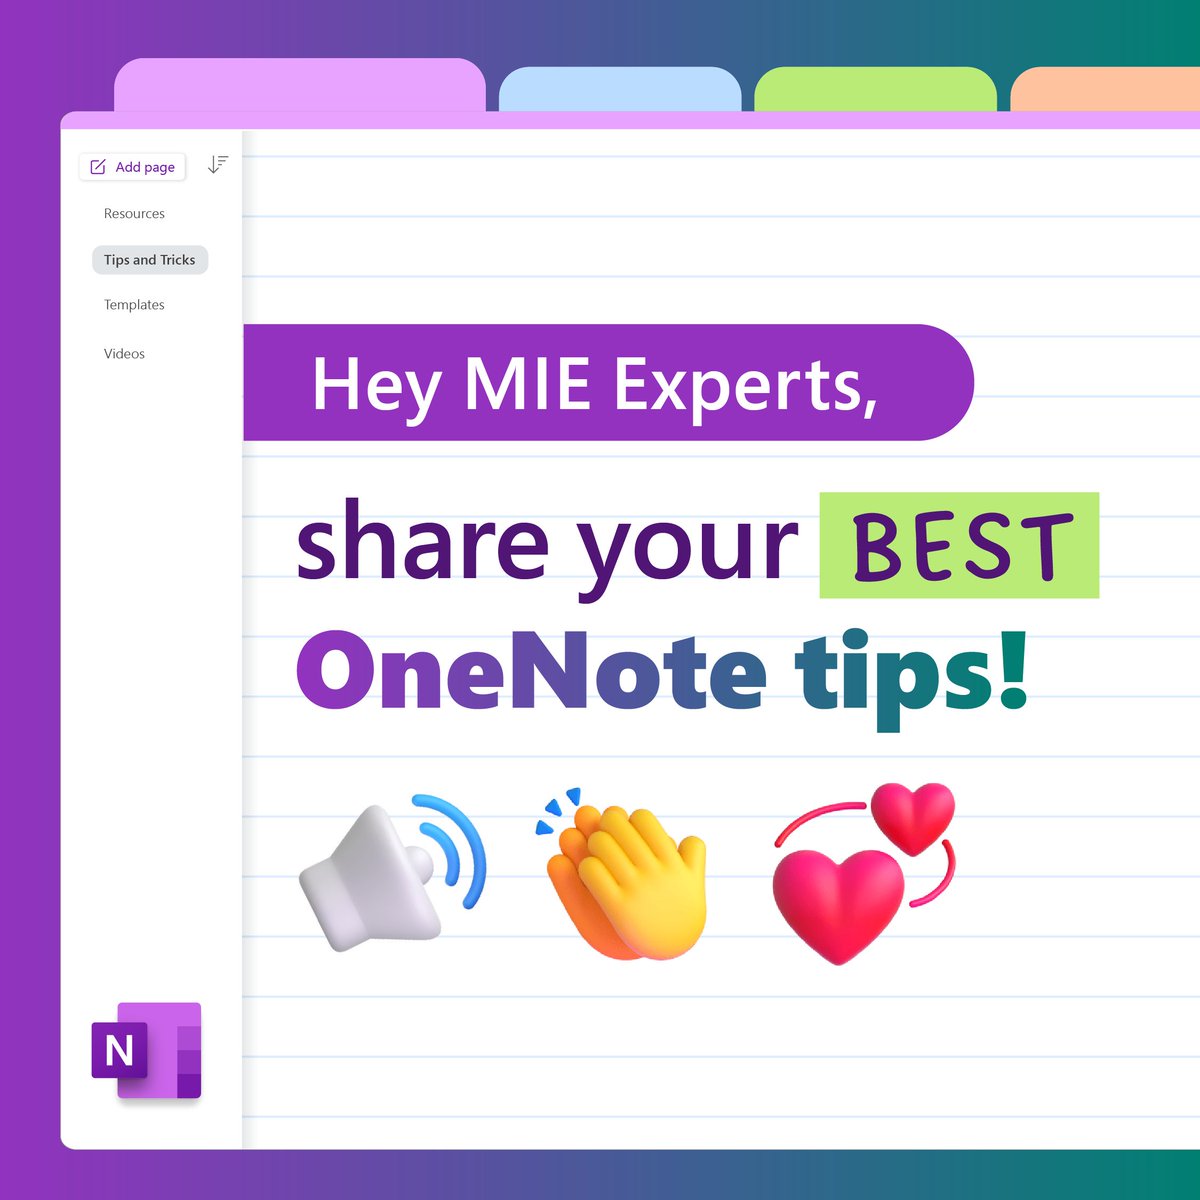 You've got ideas, we've got a community of educators who needs them! Add your #OneNote tips in the comments. #MIEExpert